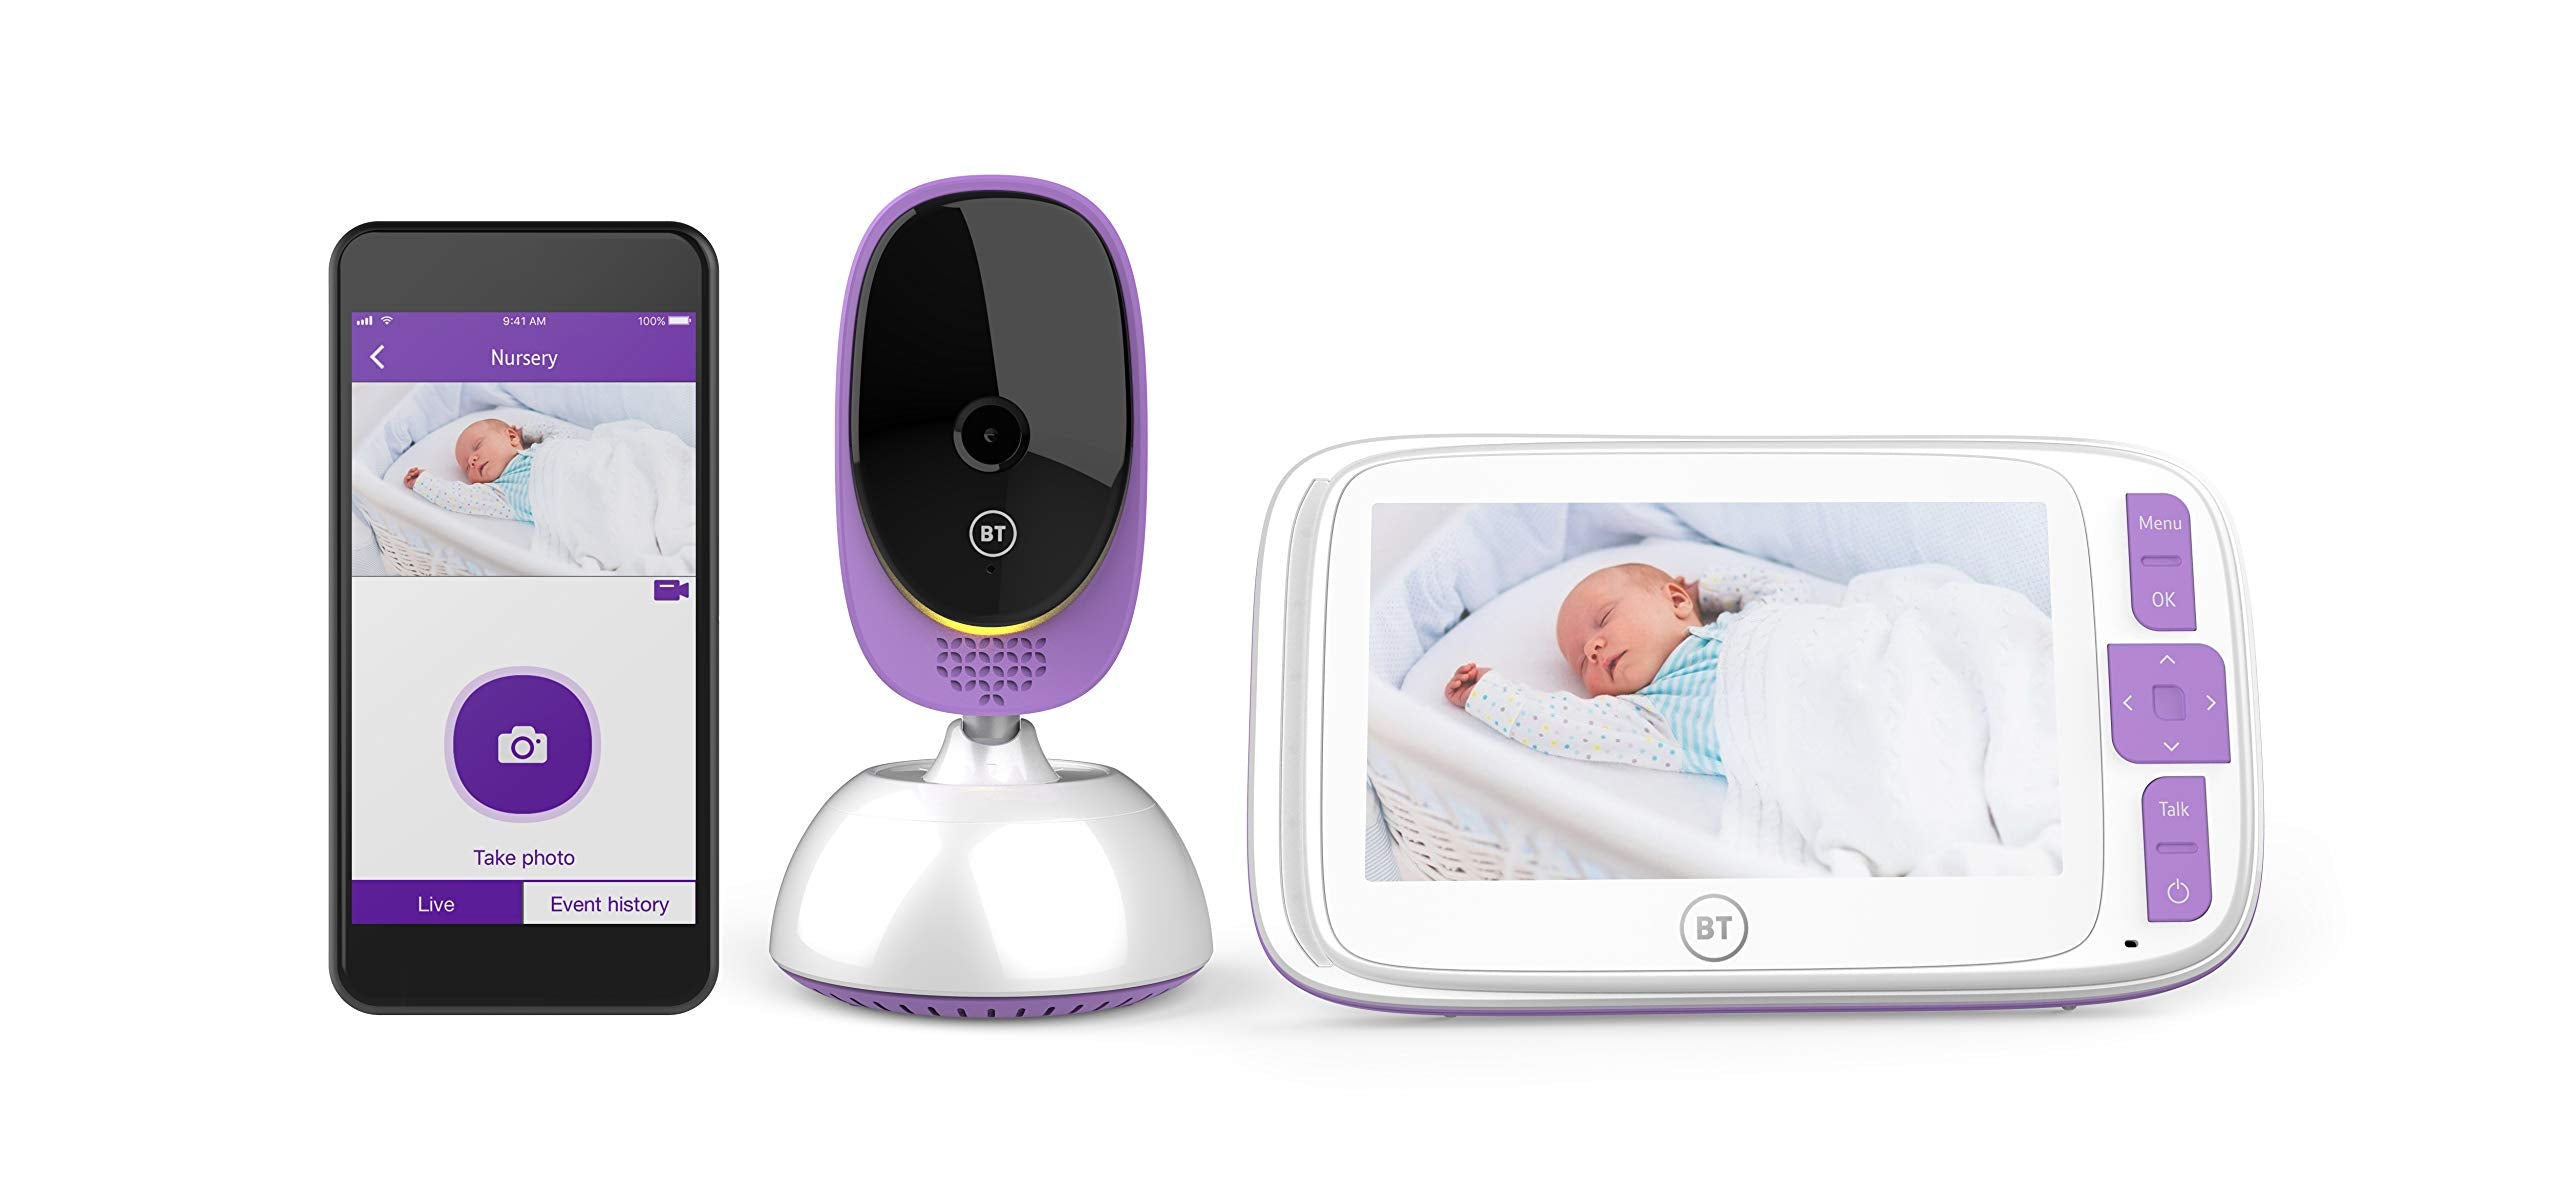 BT Smart Video Baby Monitor with 5 inch colour screen, smartphone app, HD audio, night vision, HD video streaming, remote panning, connect remotely to smartphone or tablet